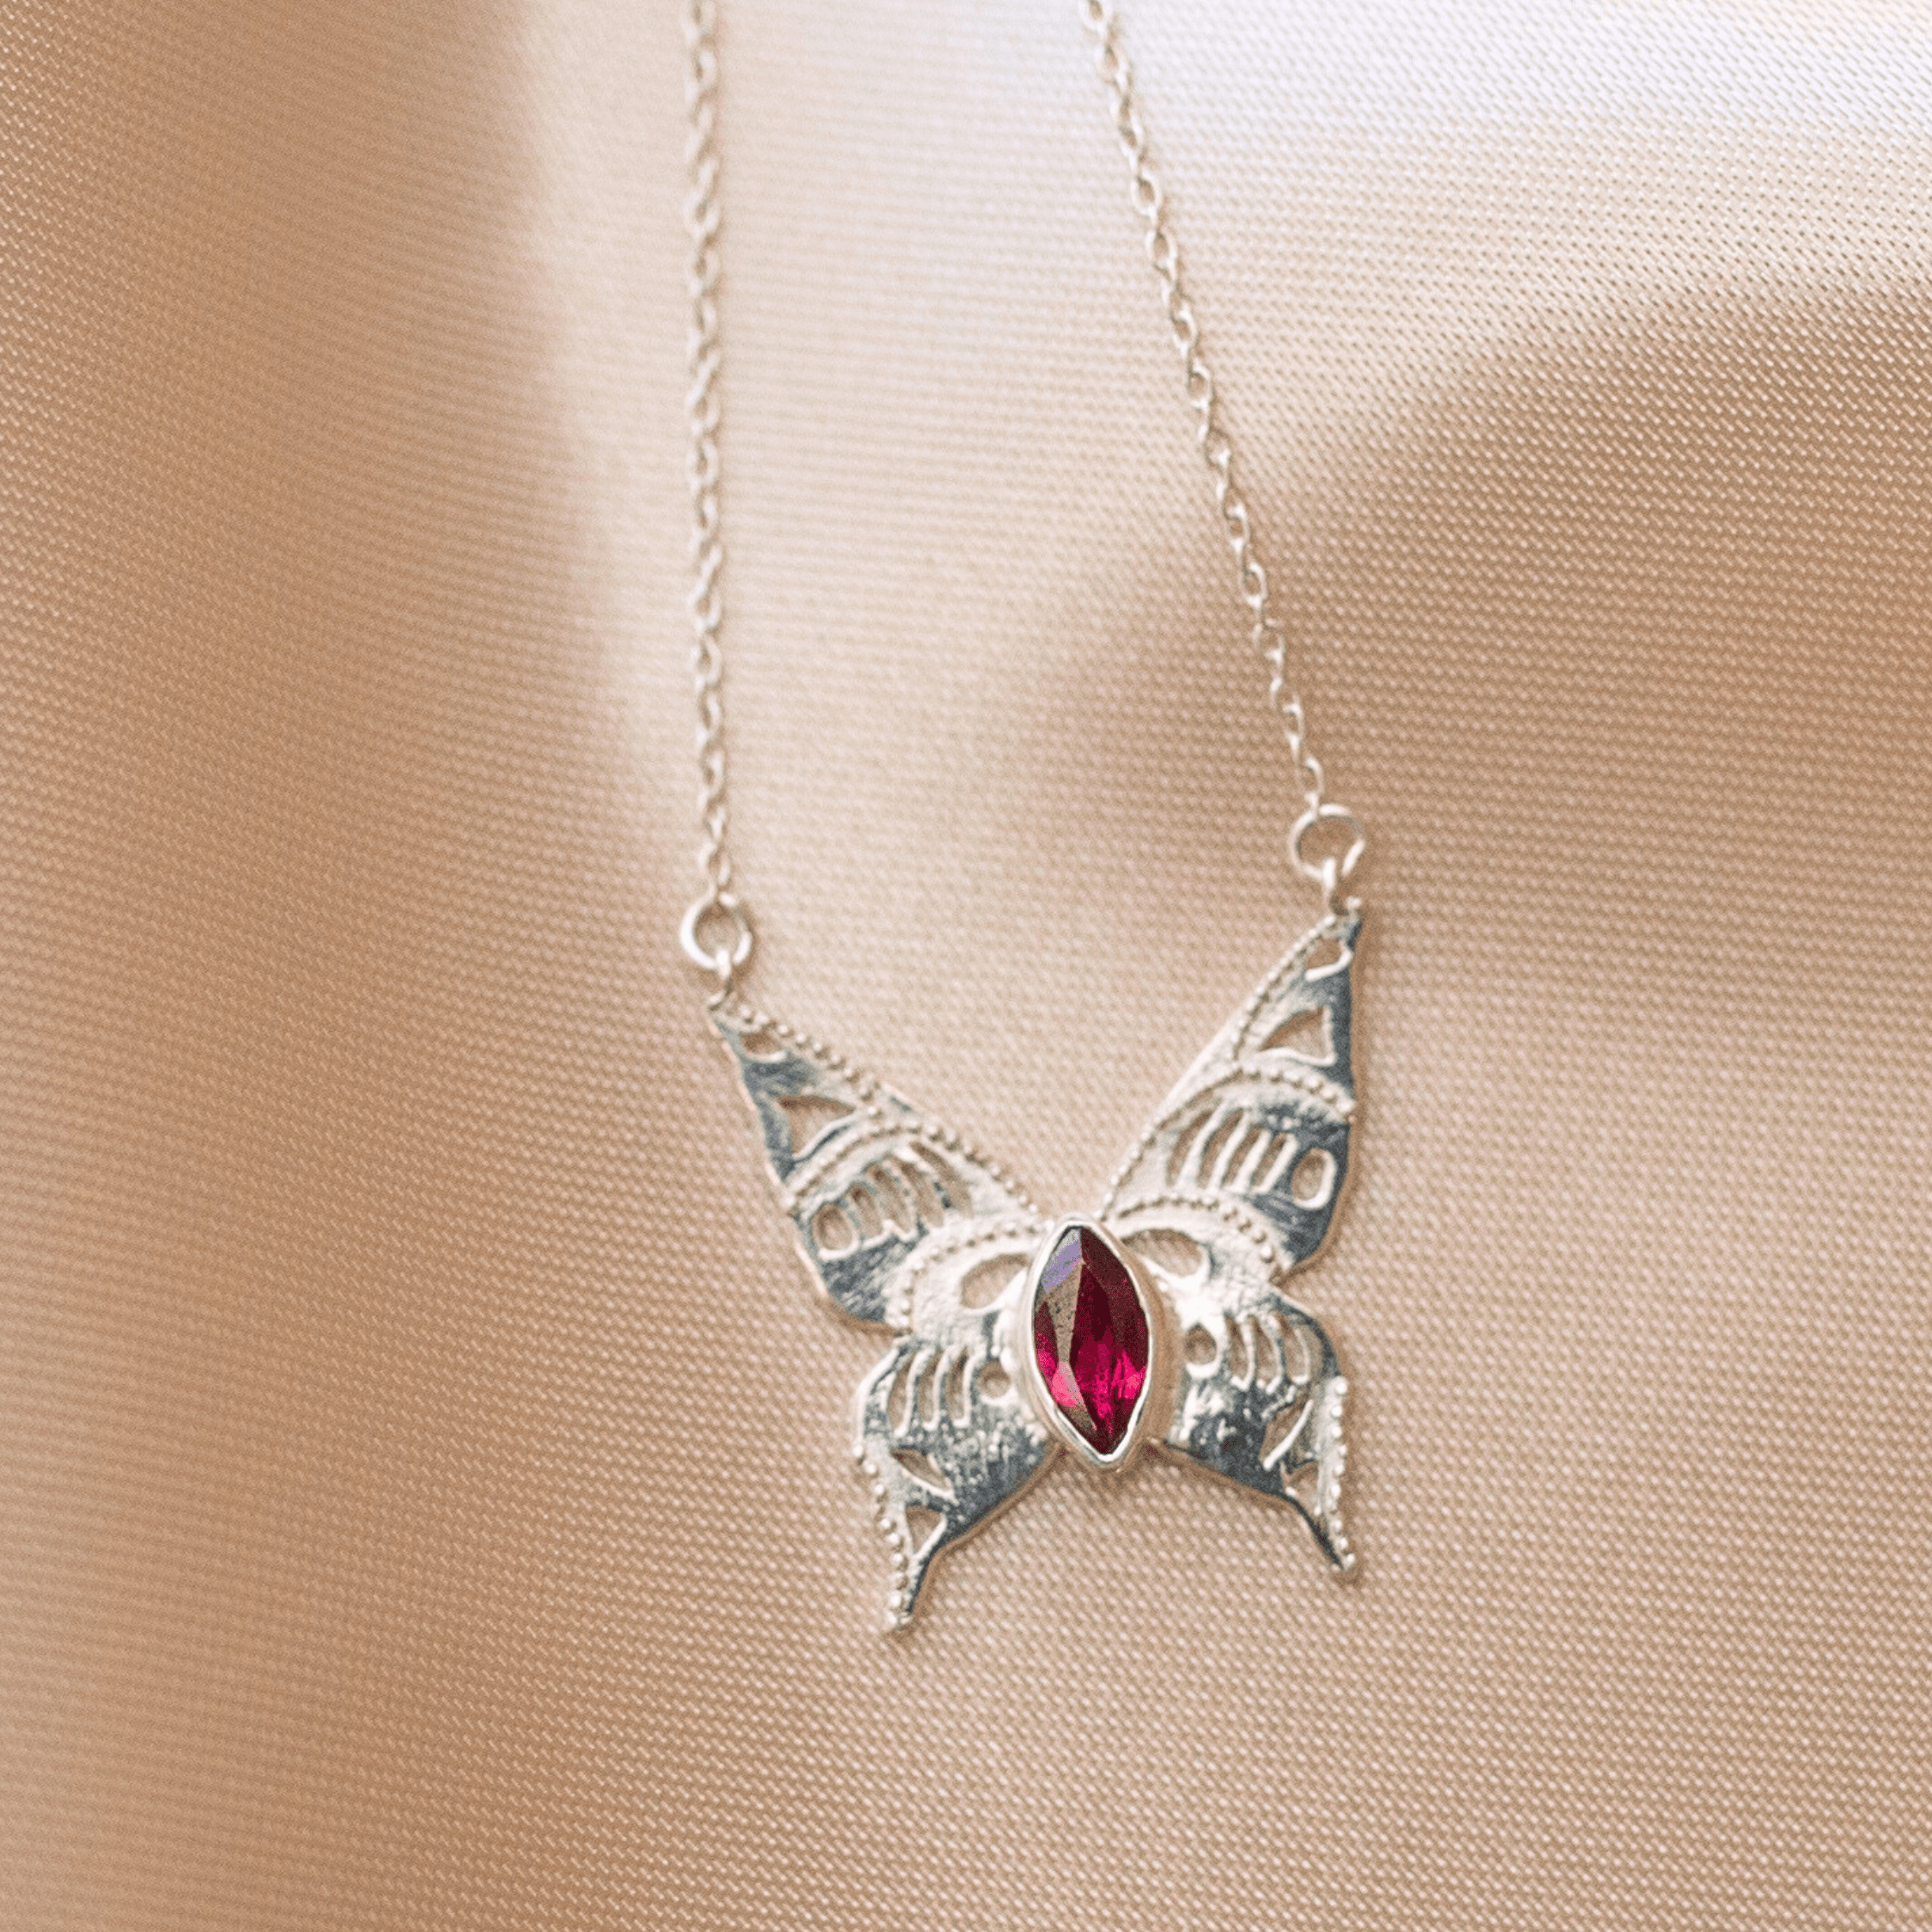 Jewelry Evolution Necklace Butterfly Necklace with Garnet